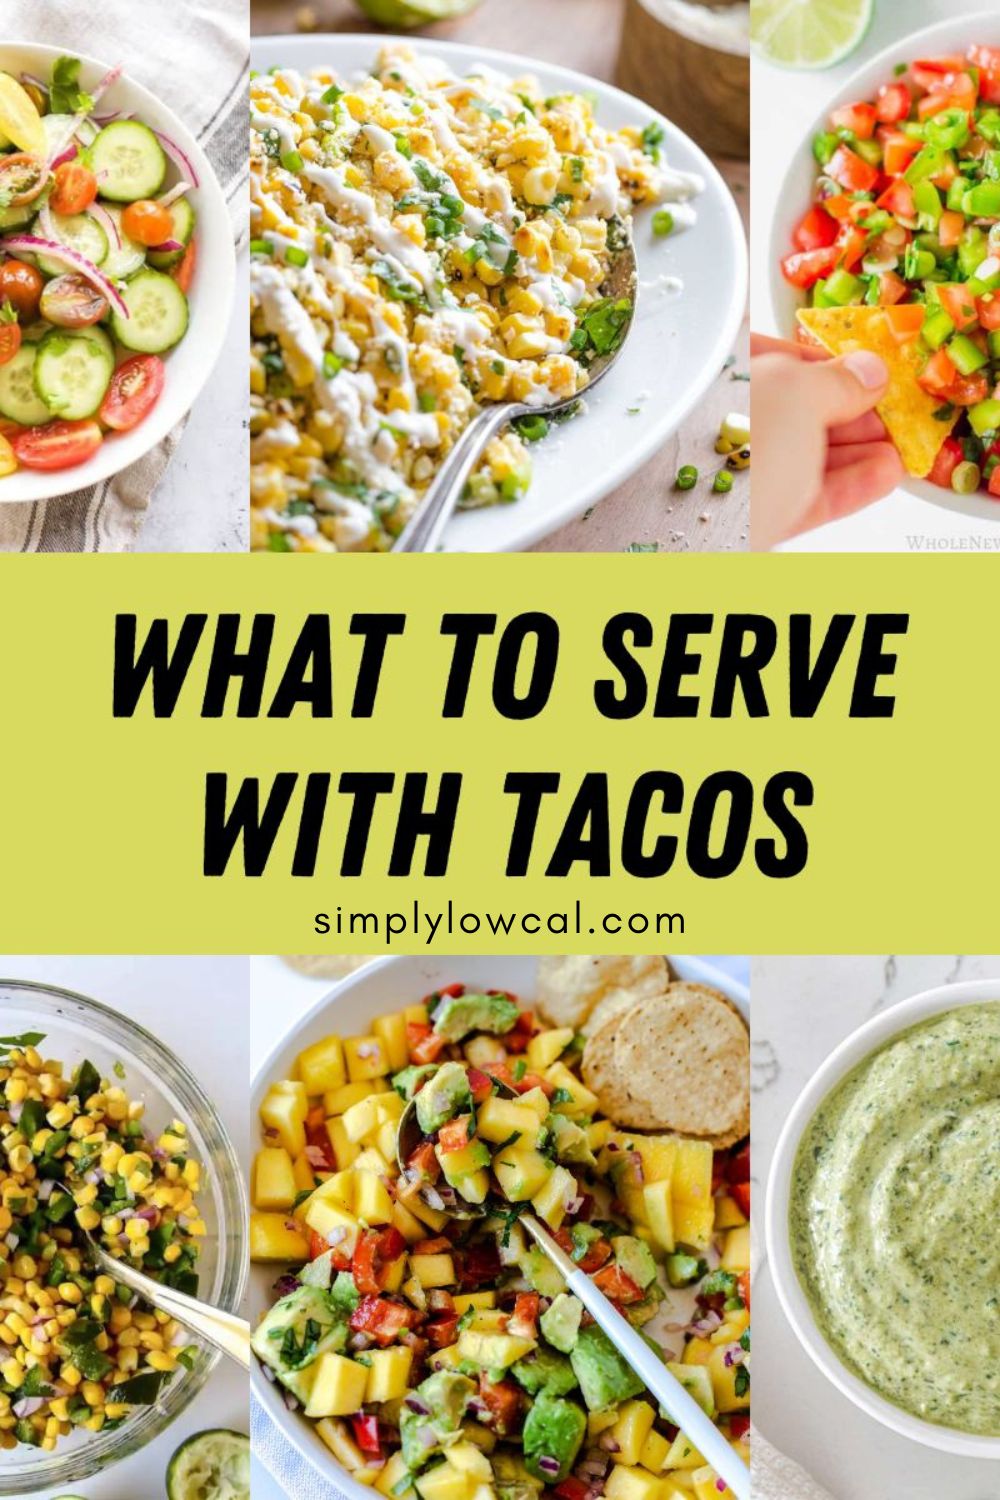 Pinterest pin of what to serve with tacos.